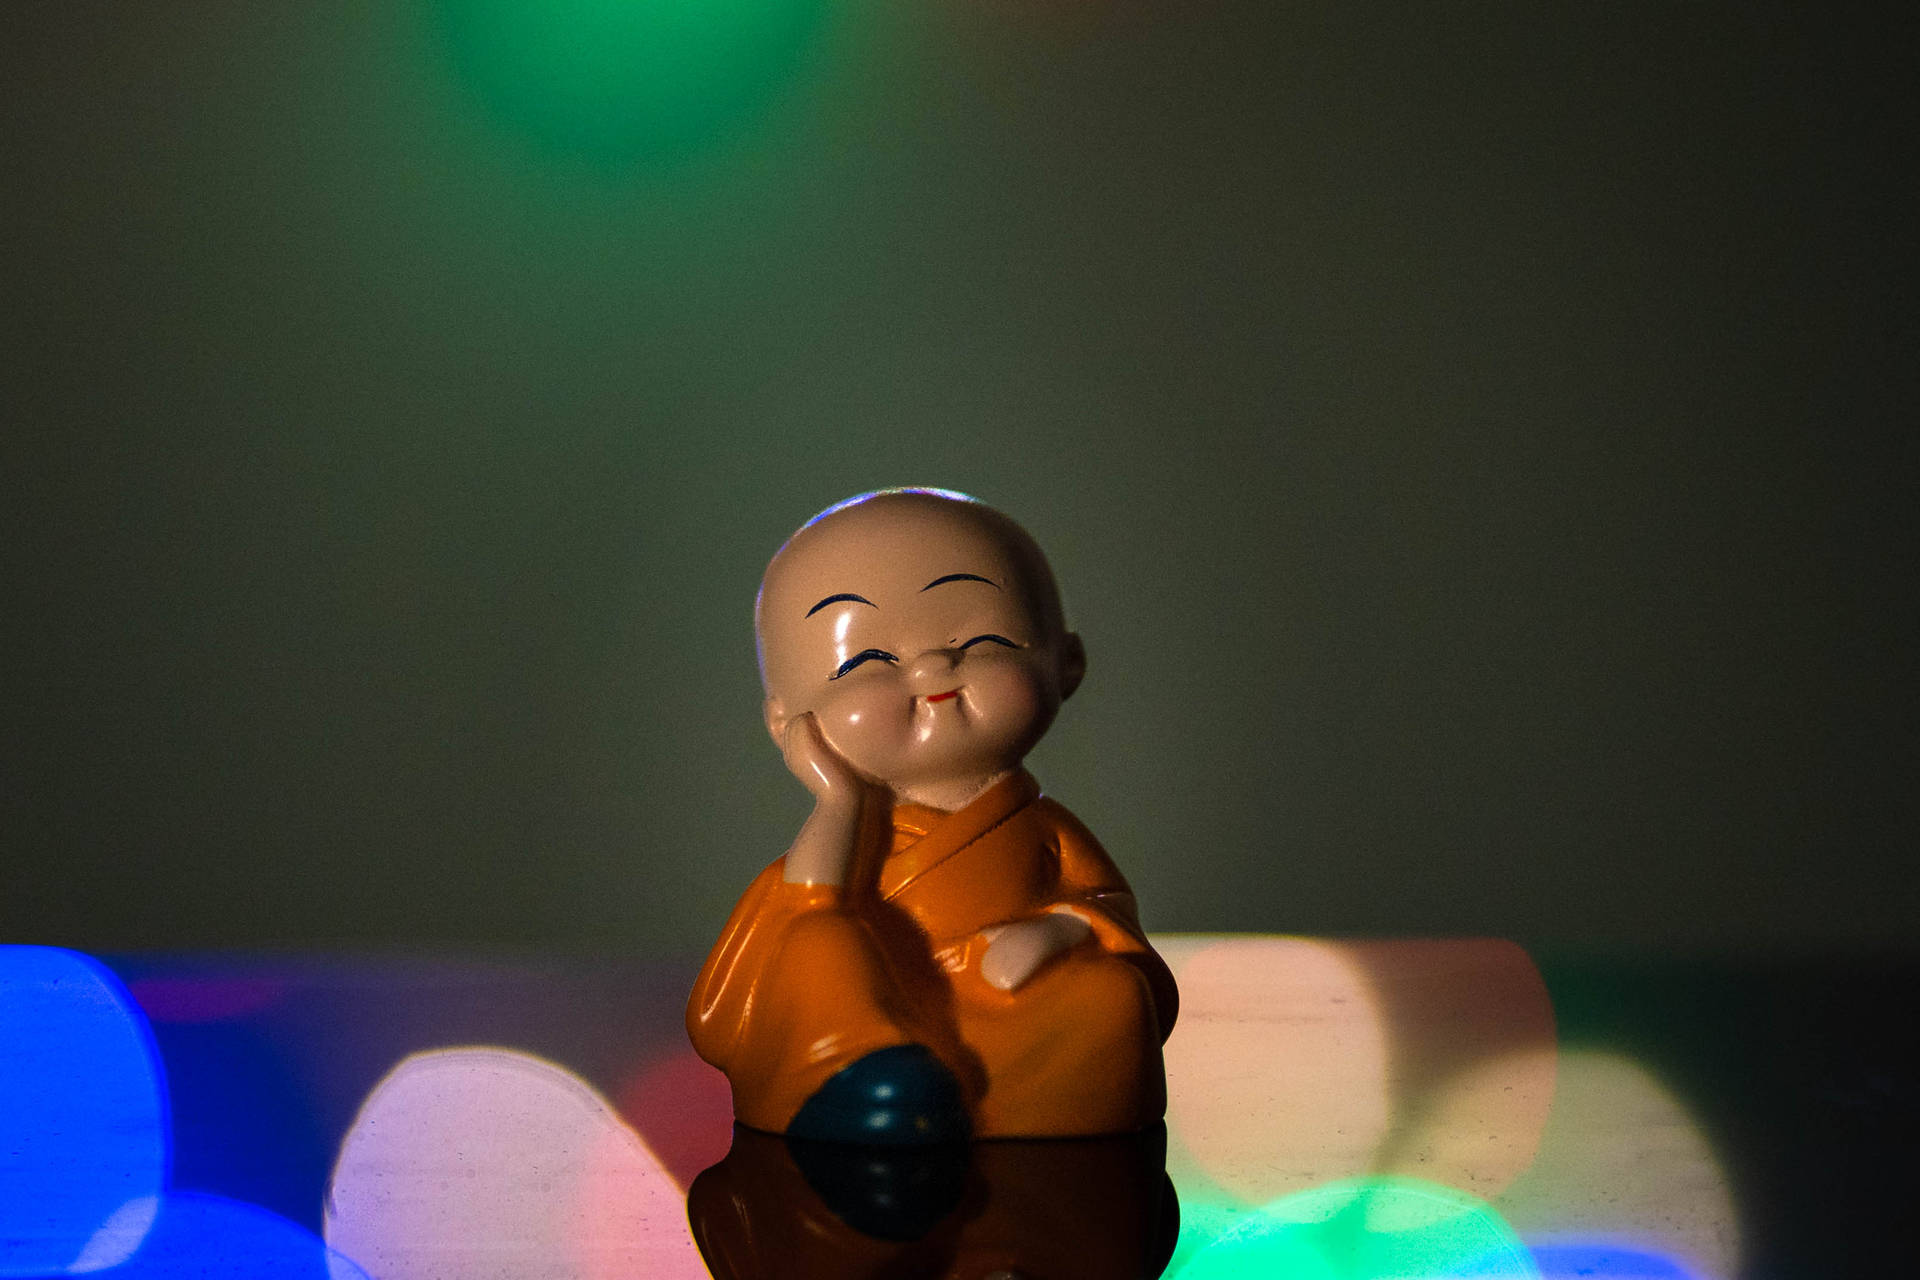 Cute Doll Monk On Table Wallpaper